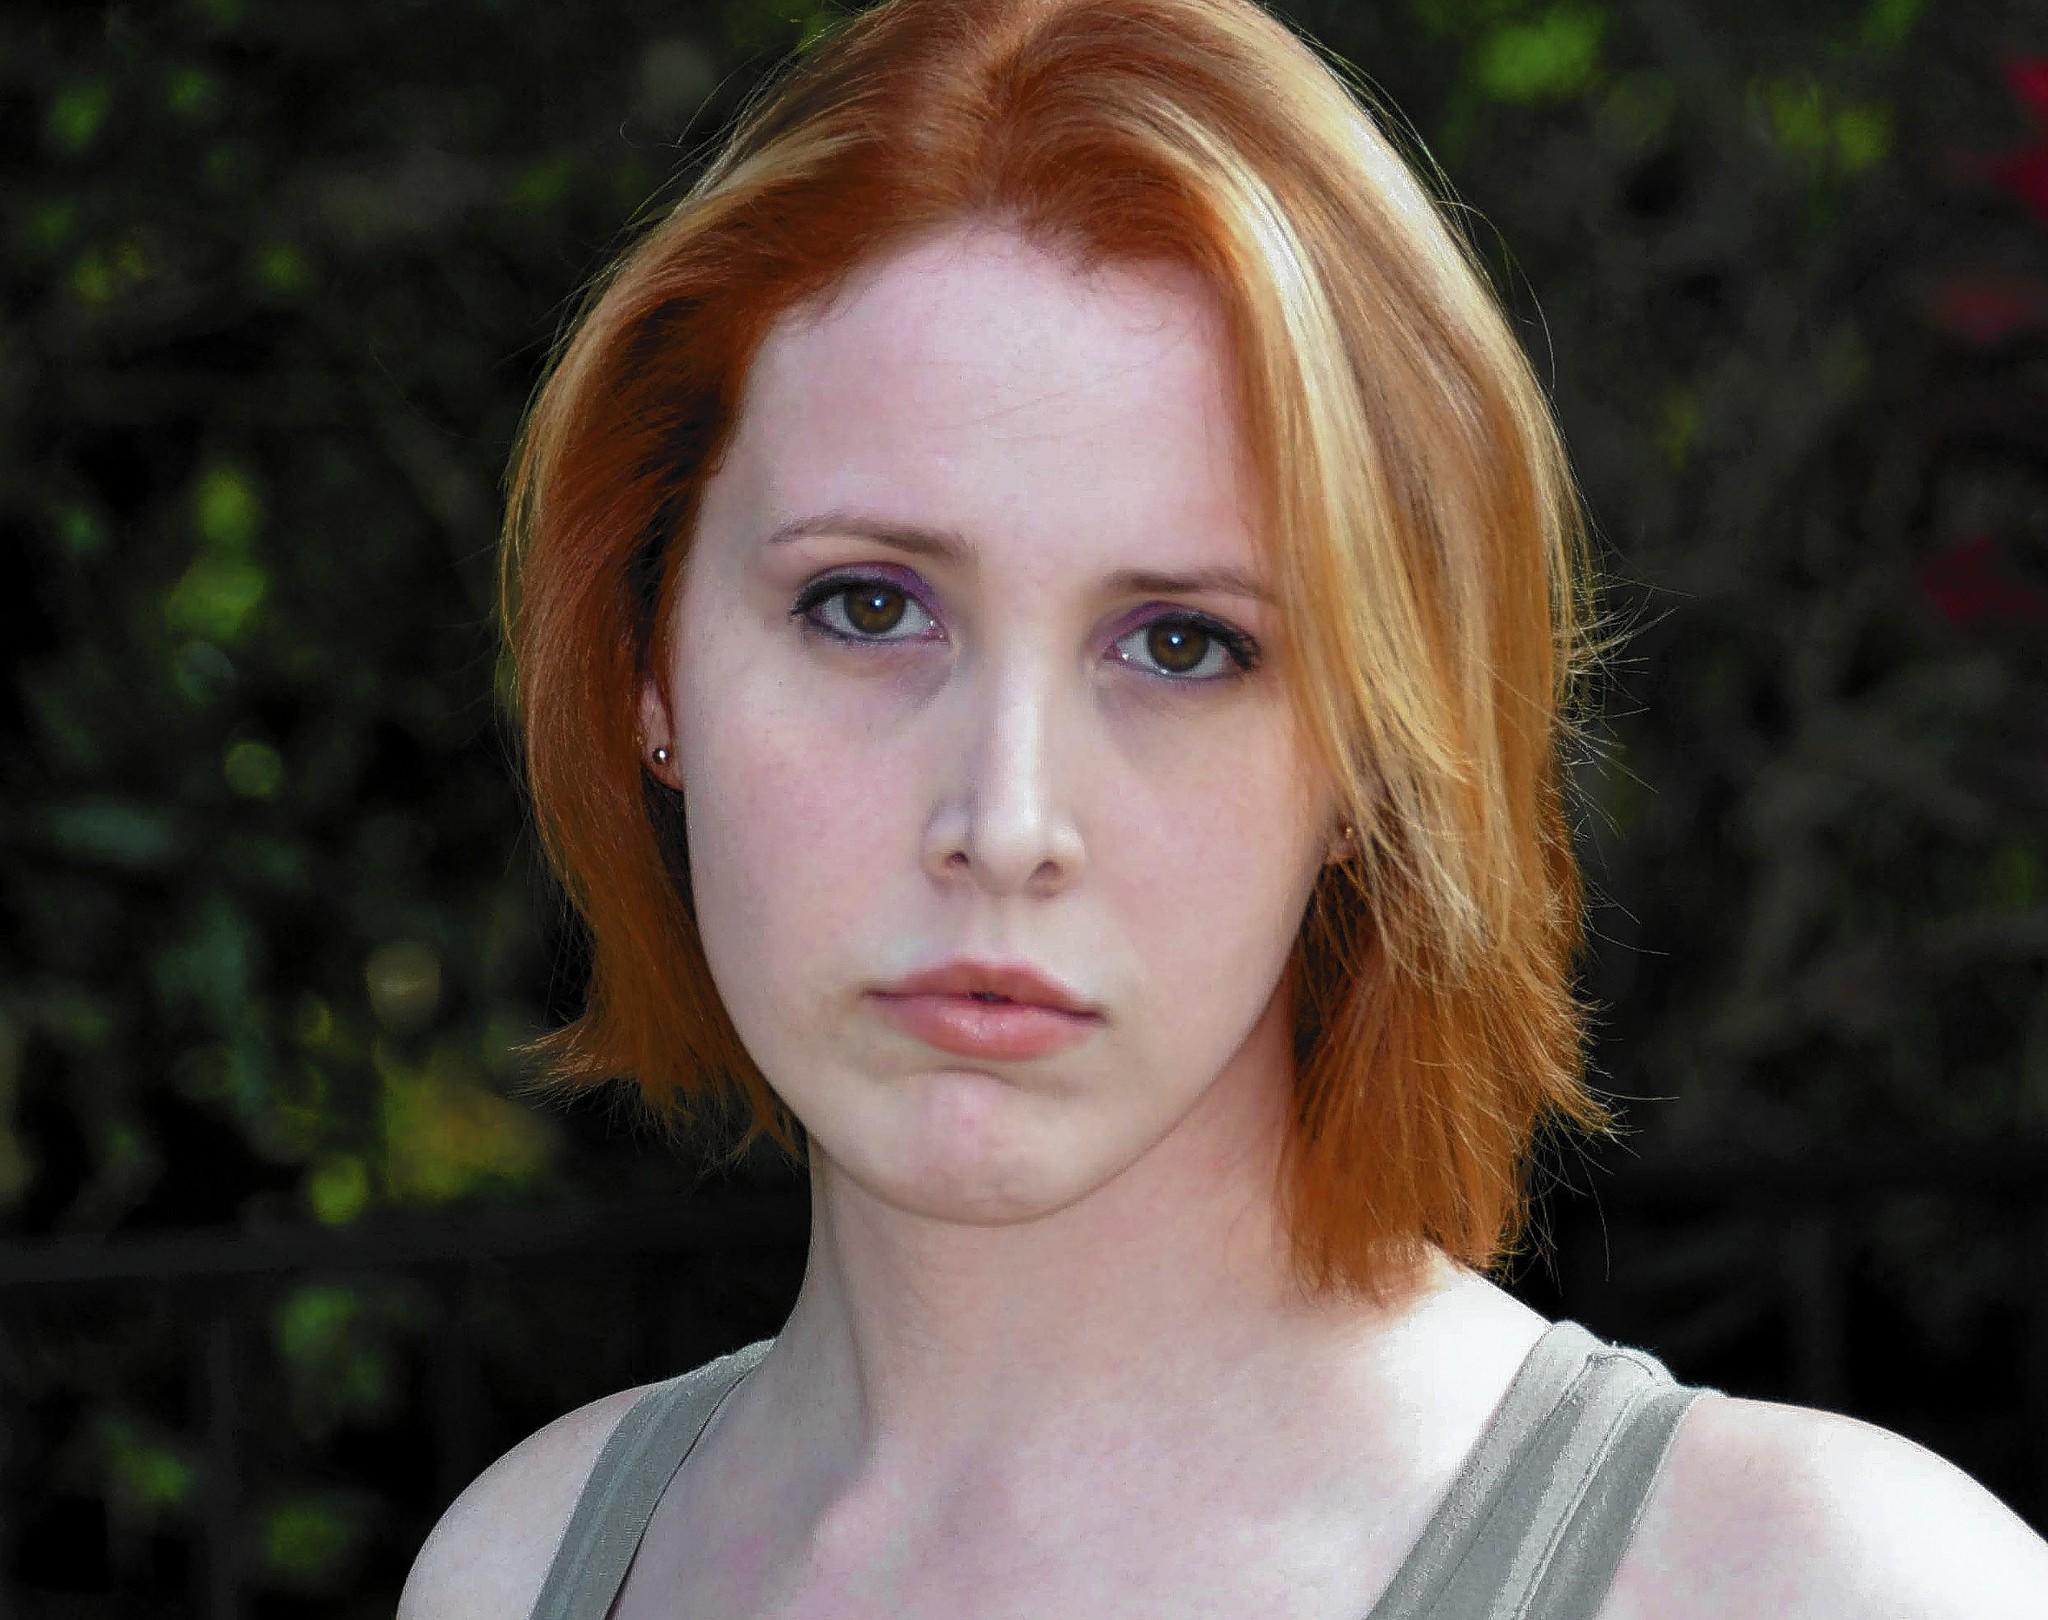 Dylan Farrow on Woody Allen: 'Why shouldn't I want to bring him down?' - LA Times2048 x 1620